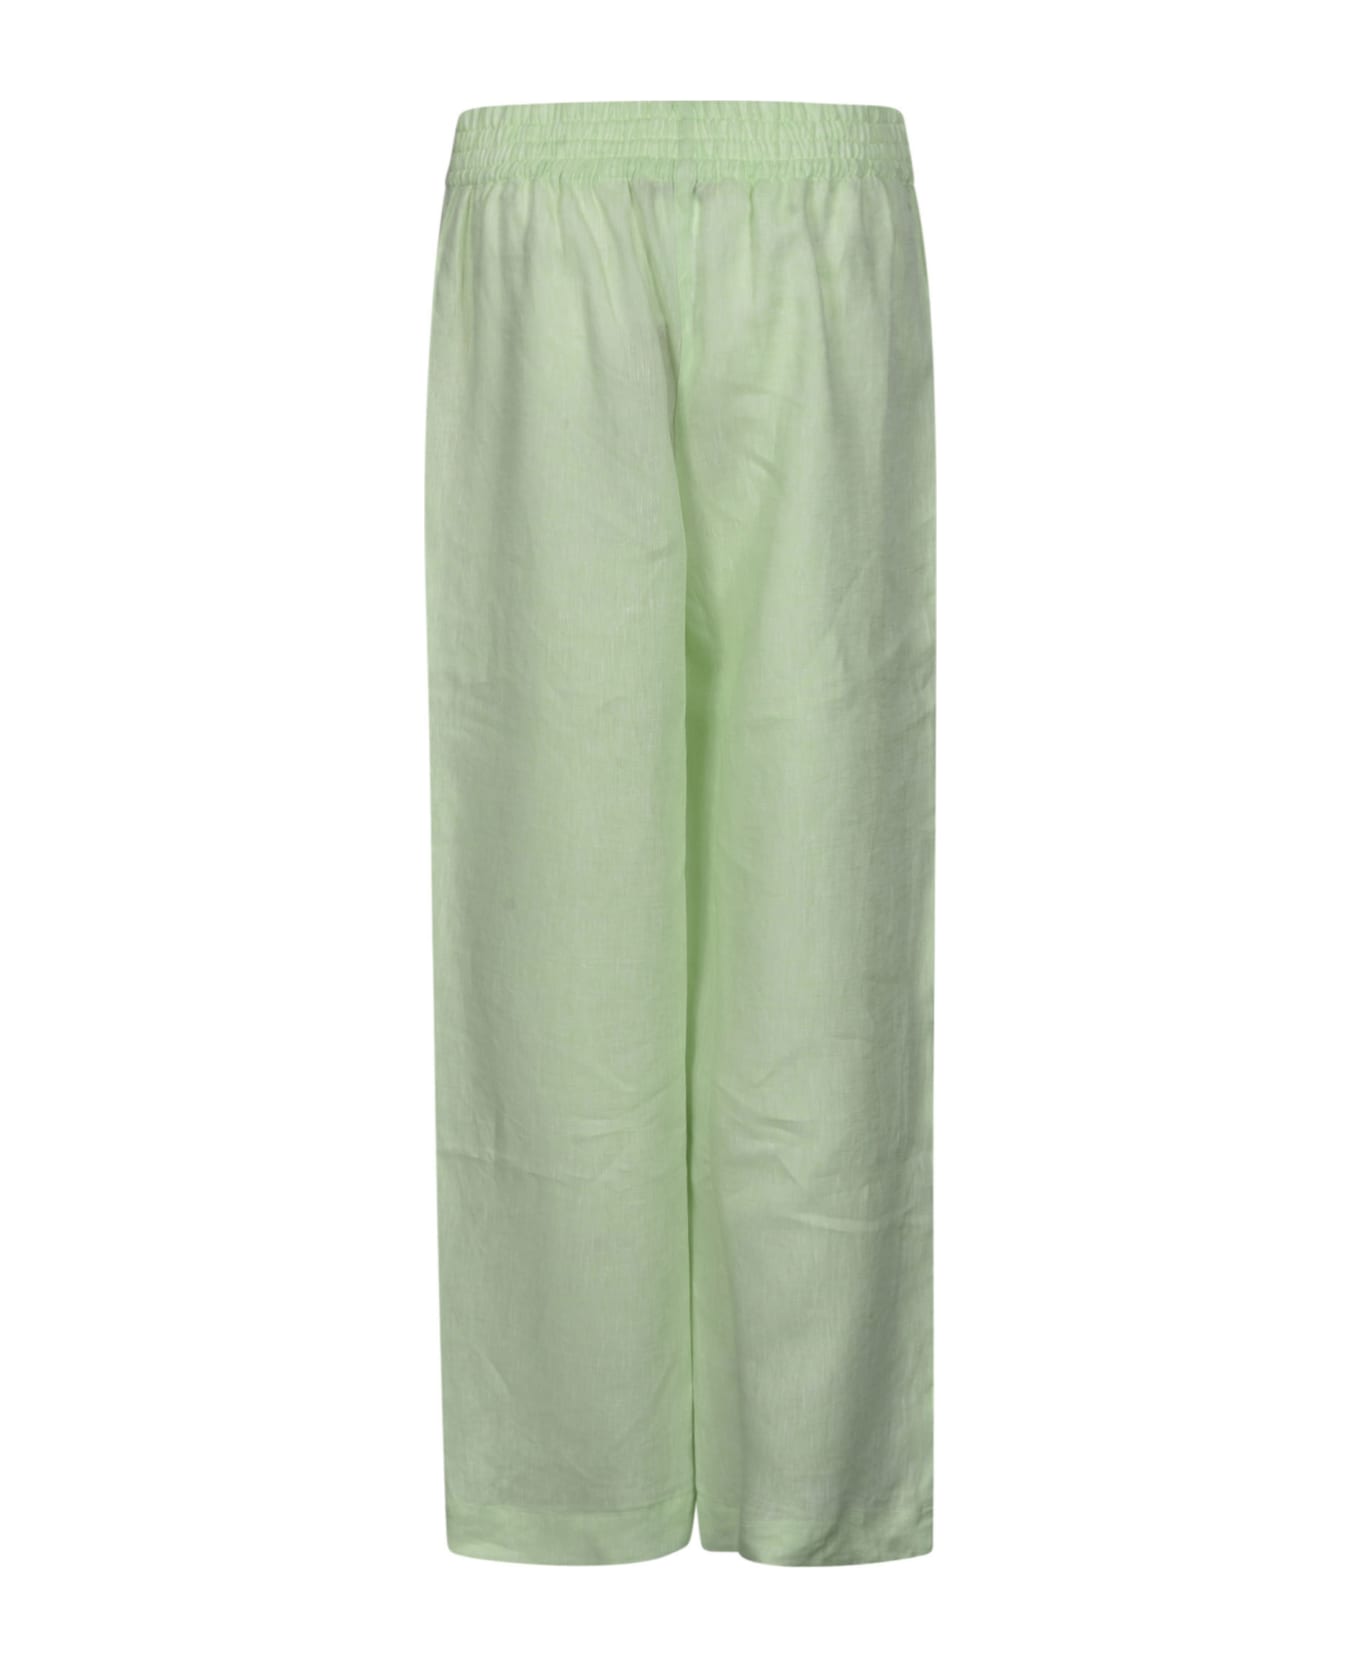 Ermanno Scervino Straight Oversized Trousers - Green ボトムス